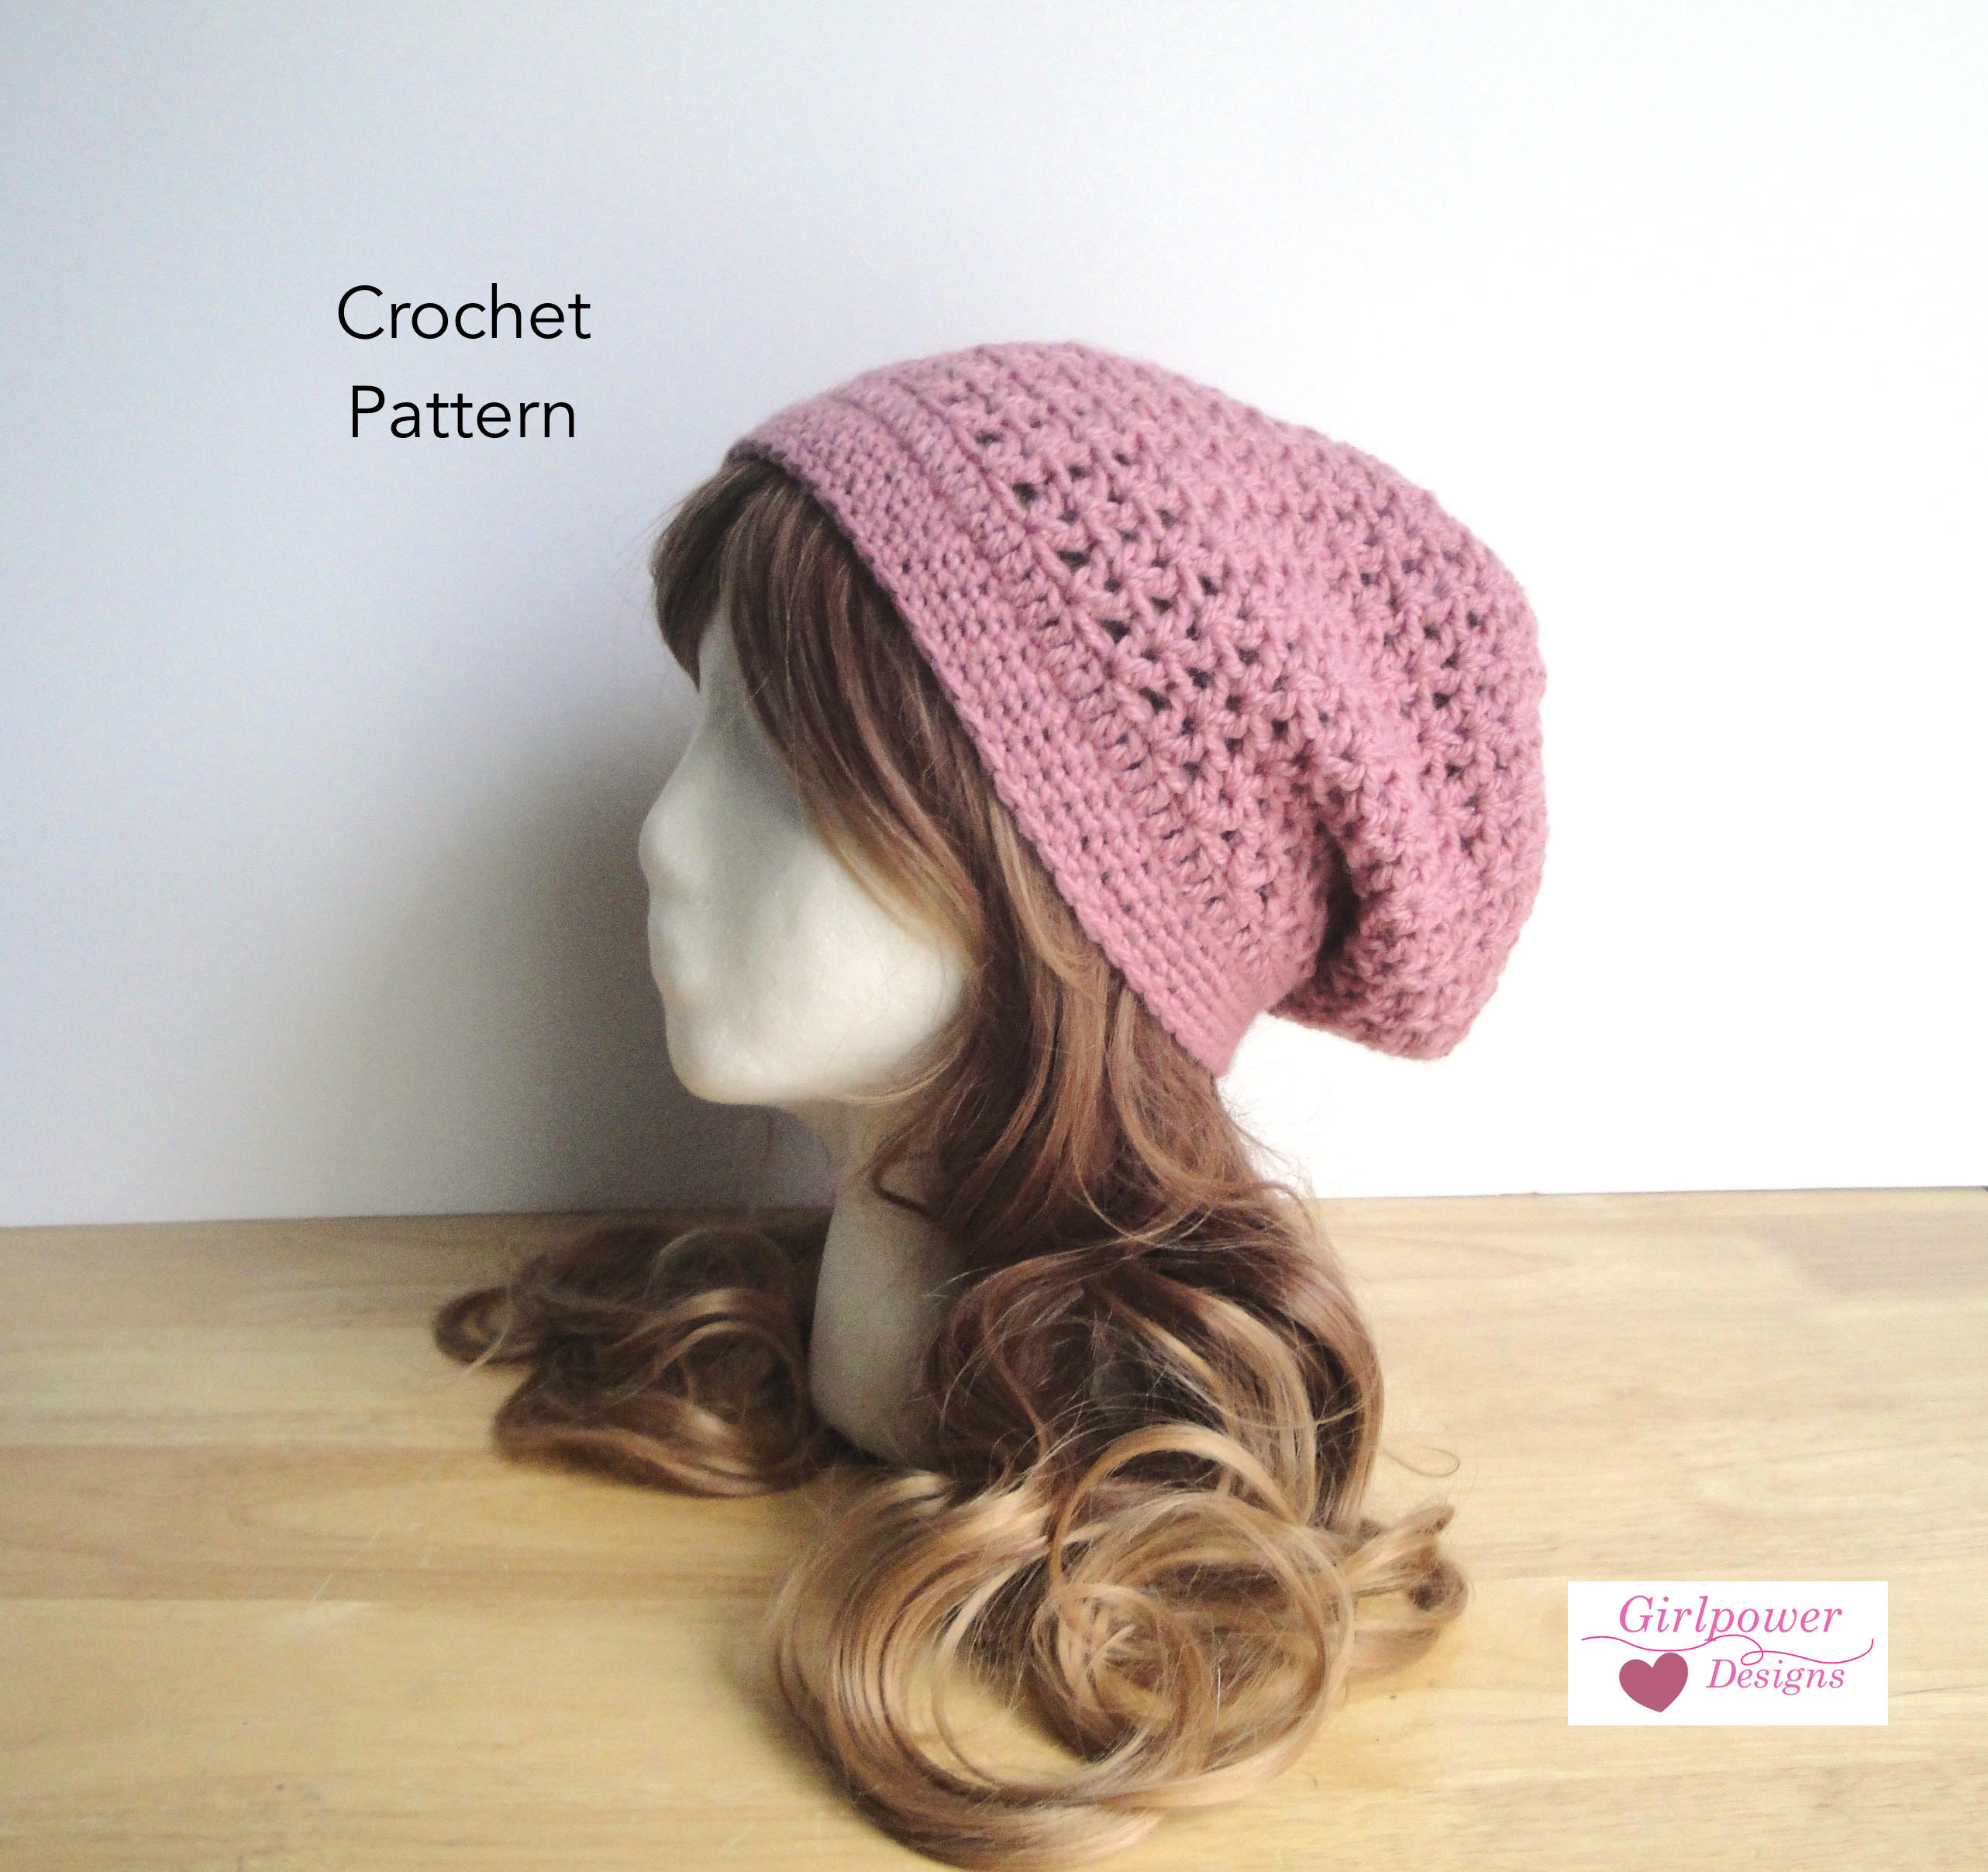 Gathered Hat Slouch Hat Cute Chic Hip Slouchy Hat Worsted Weight Yarn Scrunch Hat Easy Crochet Pattern Teen Girls Women